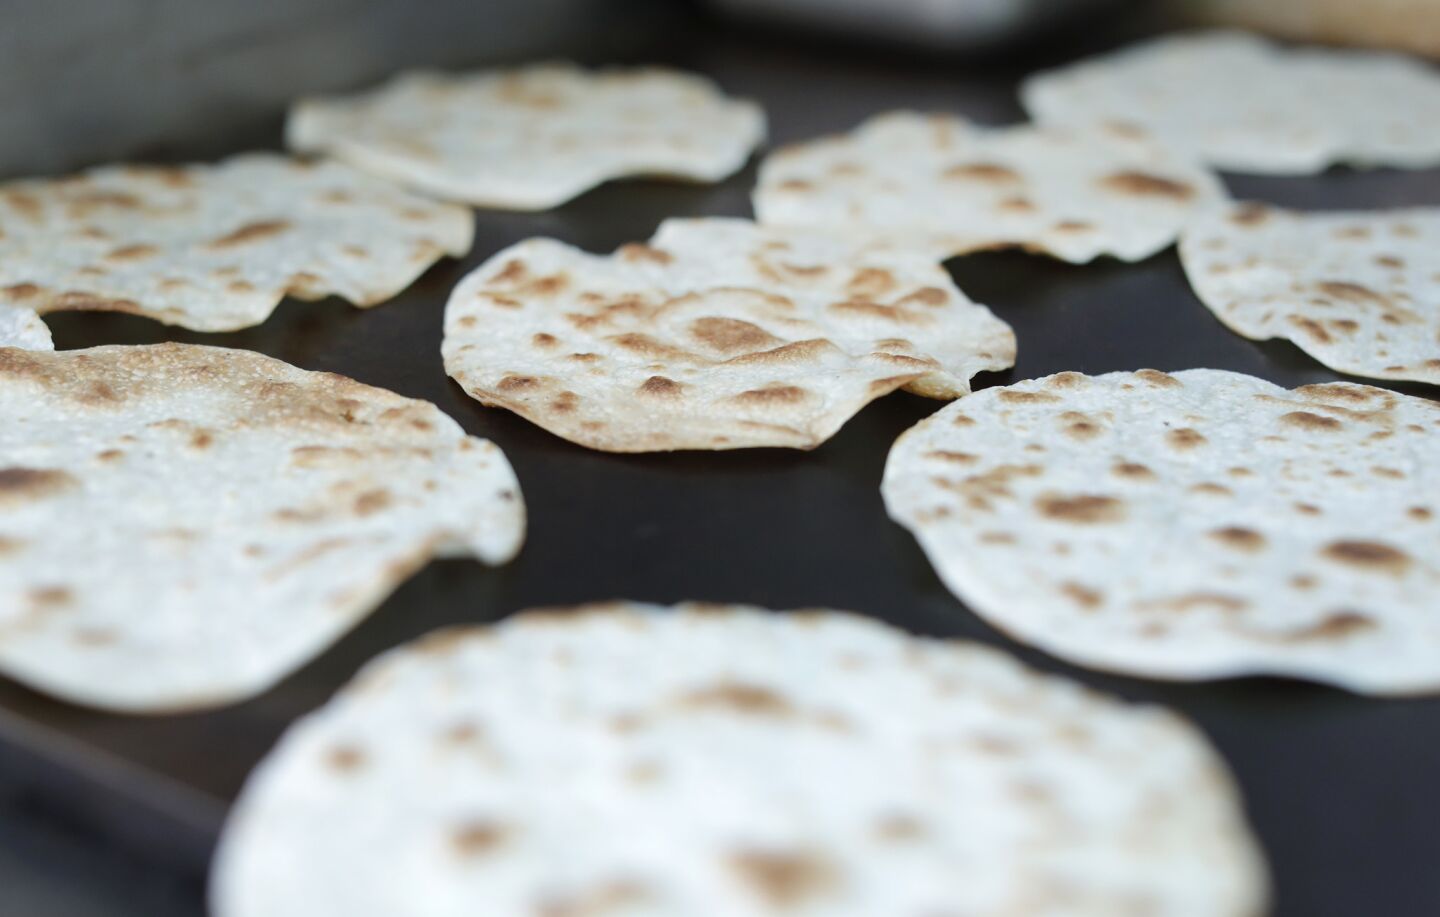 Handmade flour tortillas get grilled for vampiros at the family-owned taco truck Asadero Chikali.